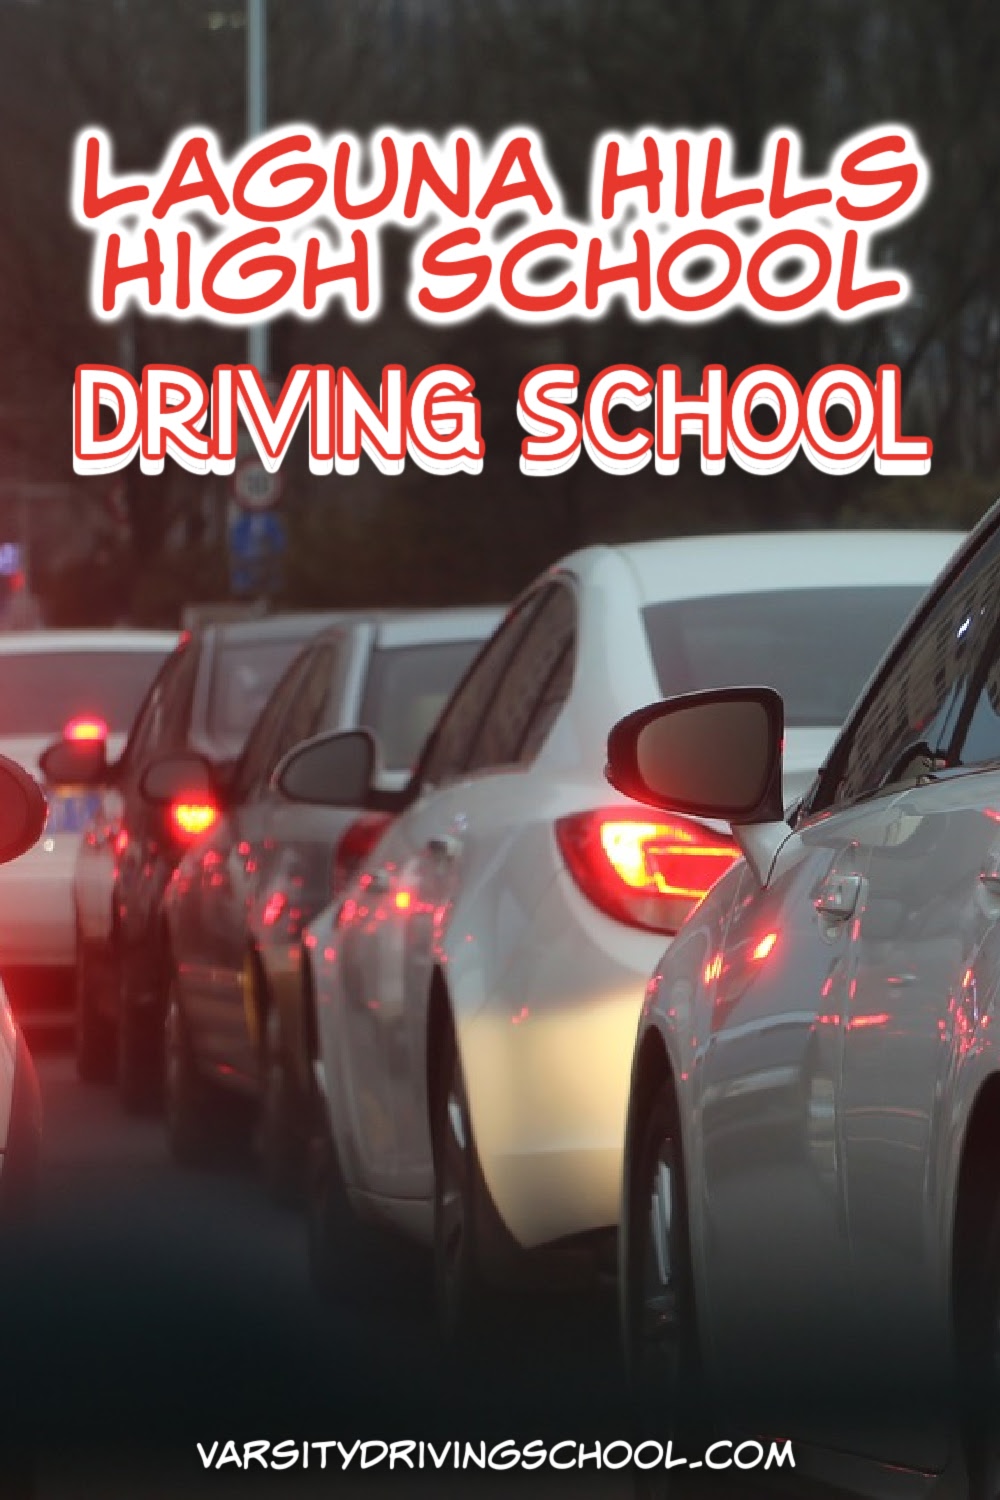 Varsity Driving School is the best Laguna Hills High School driving school, thanks to its many different services.